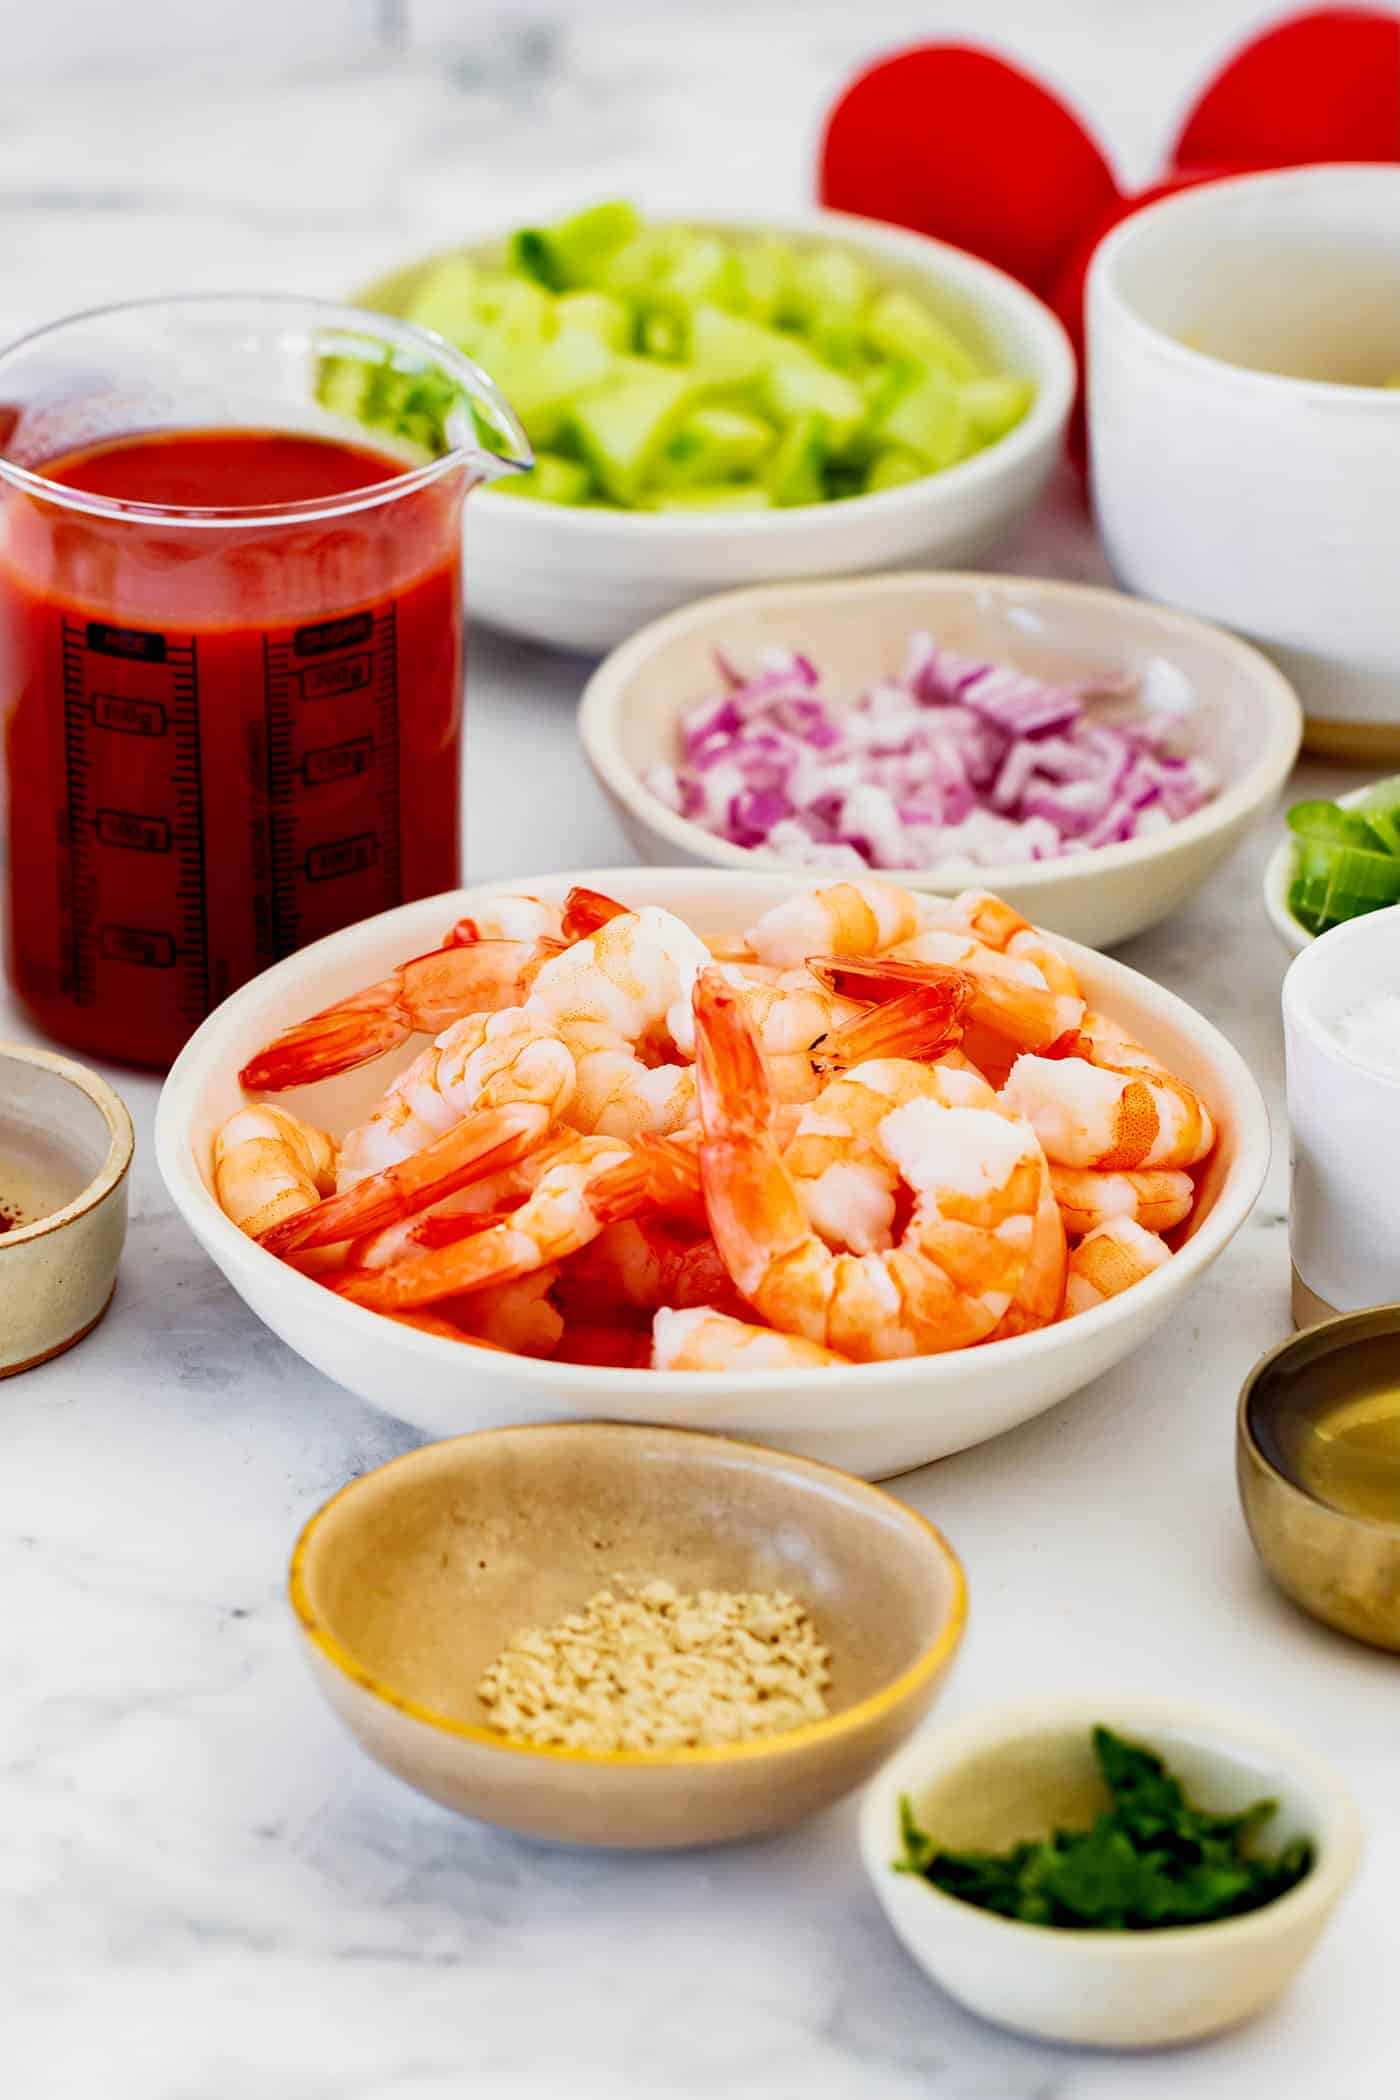 ingredients for shrimp cocktail, including shrimp, diced avocado and red onion, and tomato juice